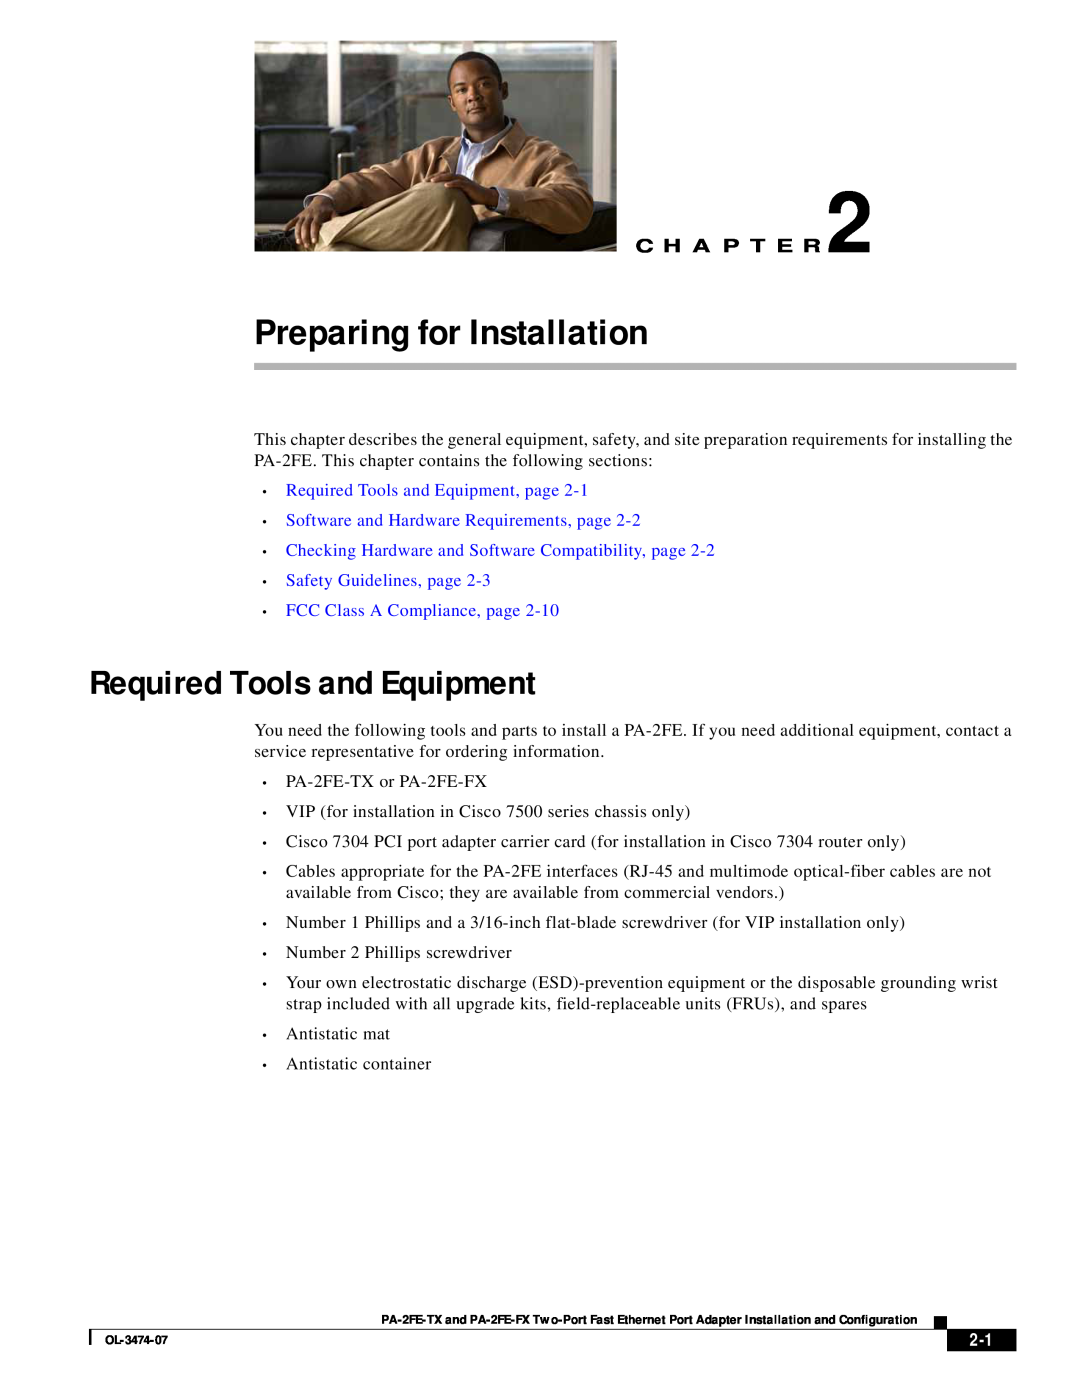 Cisco Systems PA-2FE-FX, PA-2FE-TX manual Preparing for Installation, Required Tools and Equipment, page, C H A P T E R 